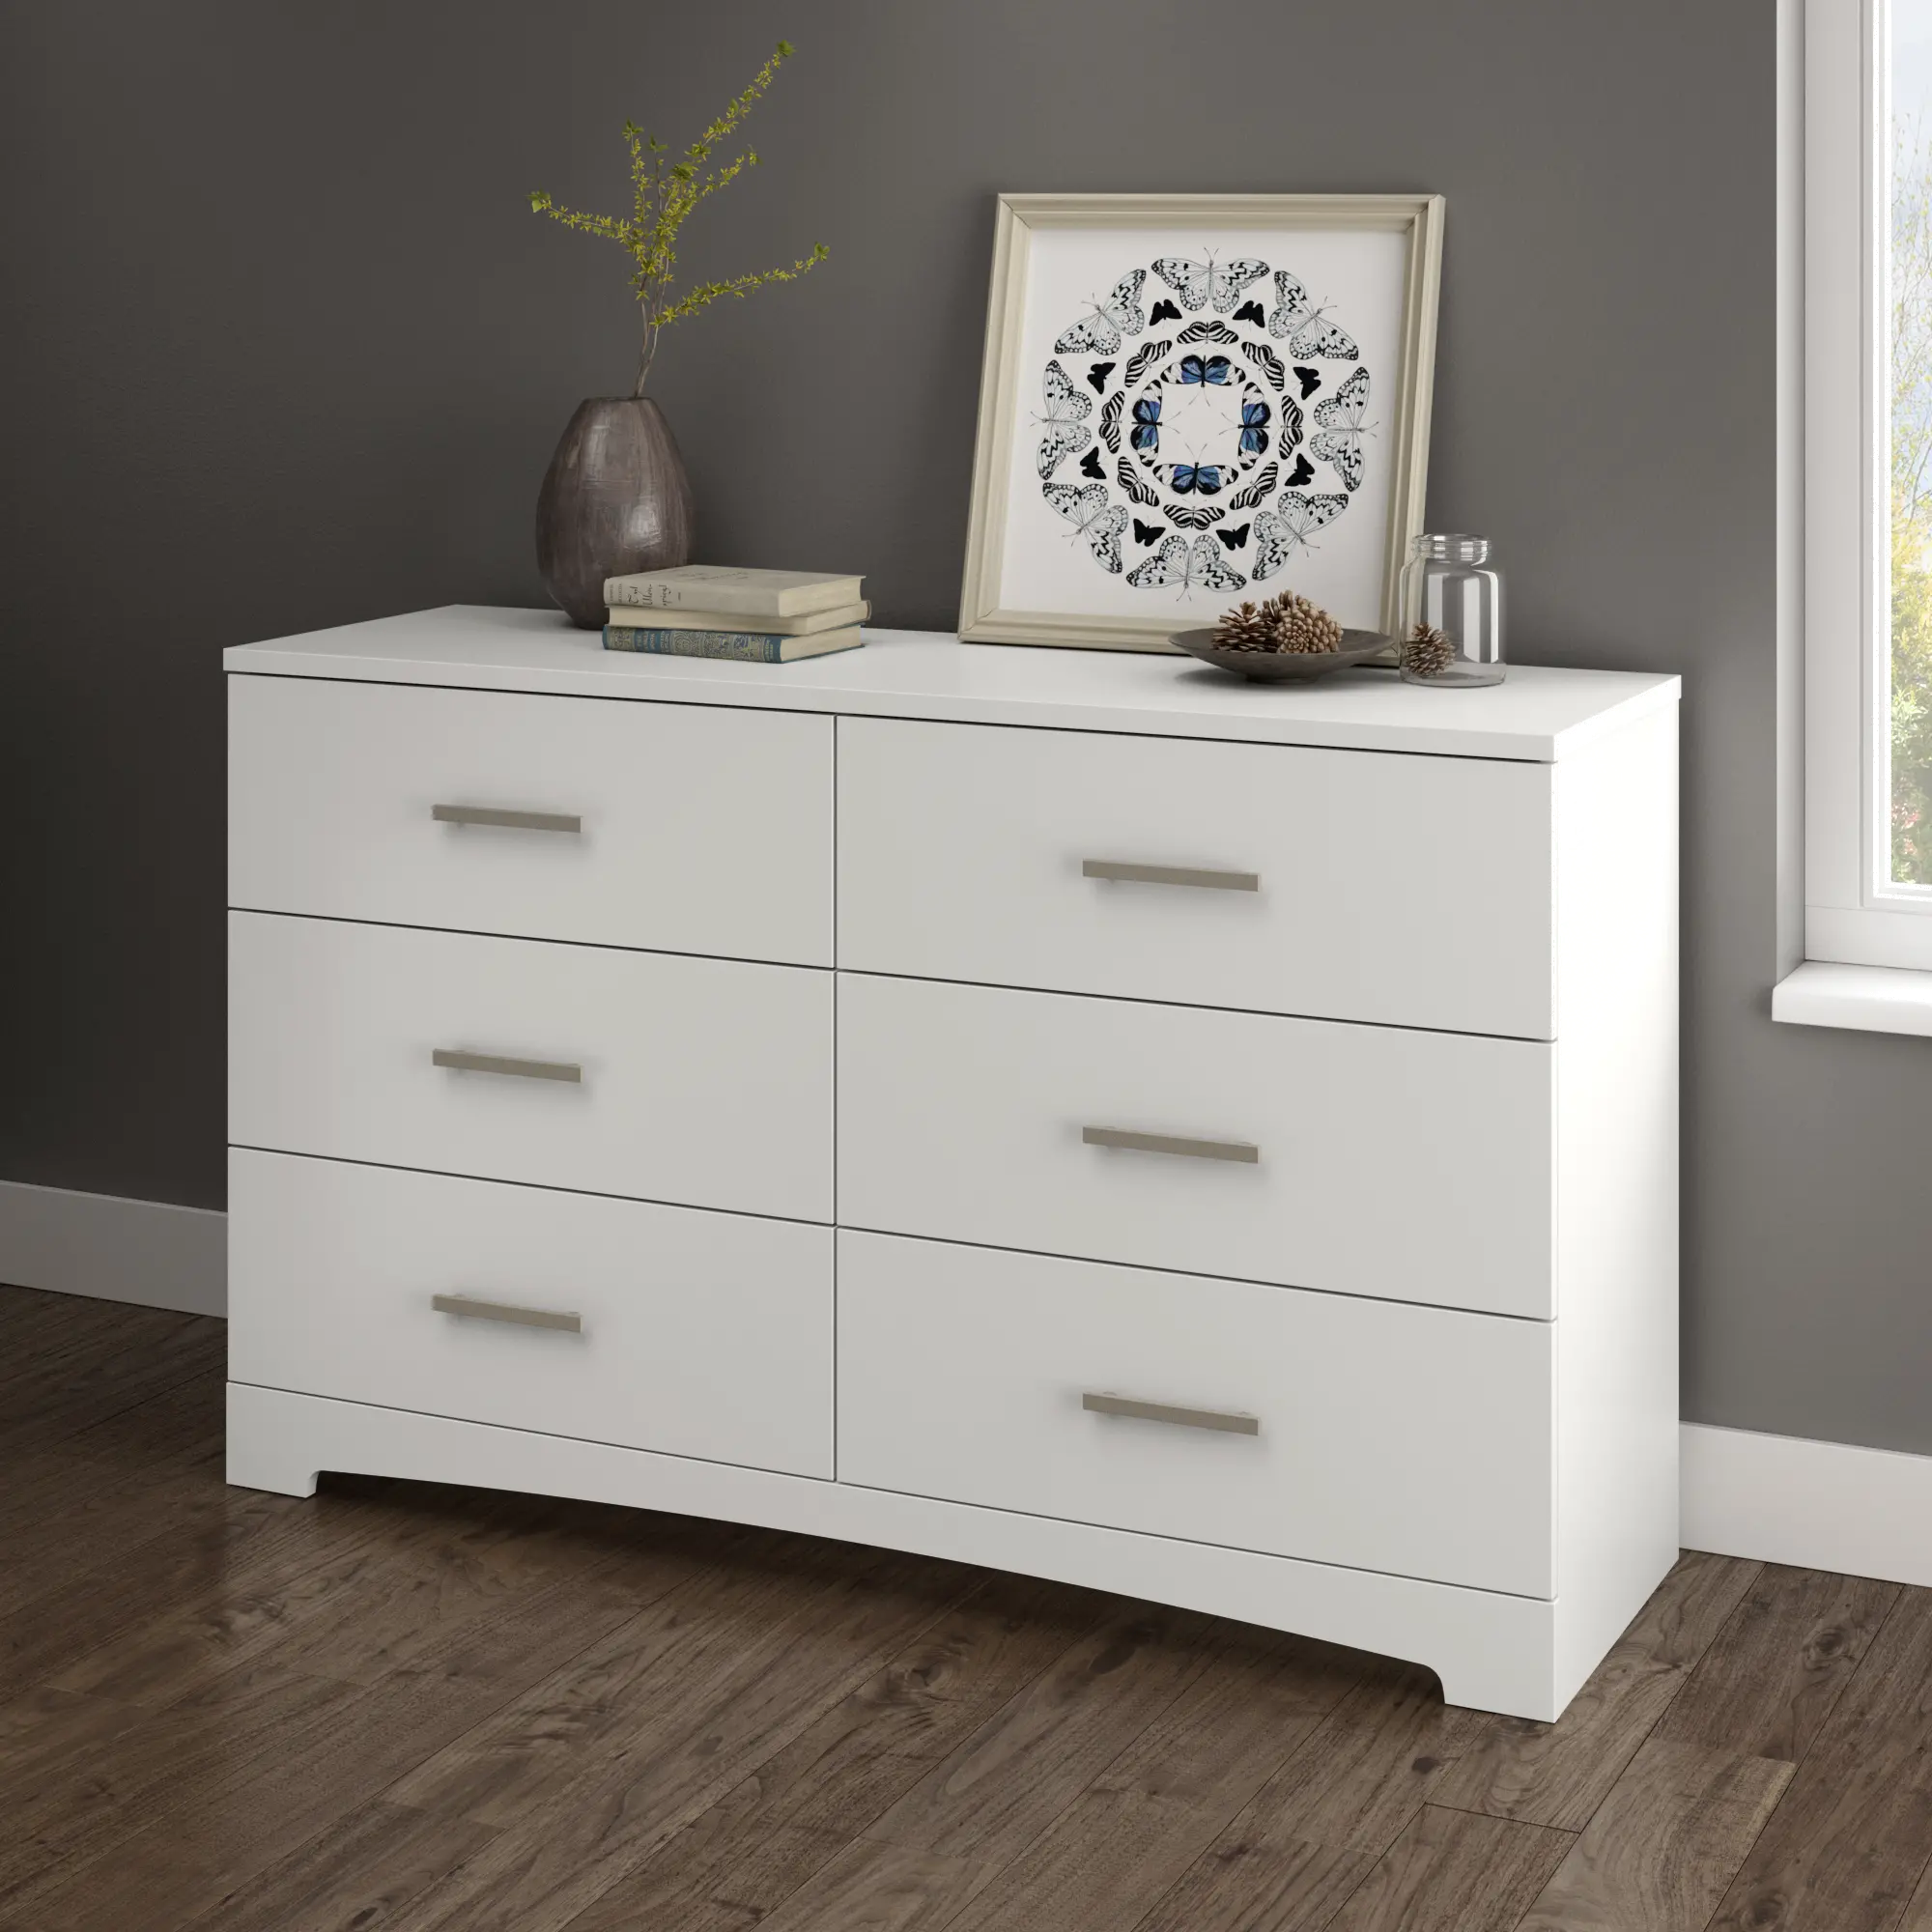 10450 Gramercy Pure White 6-Drawer Double Dresser - Sout sku 10450